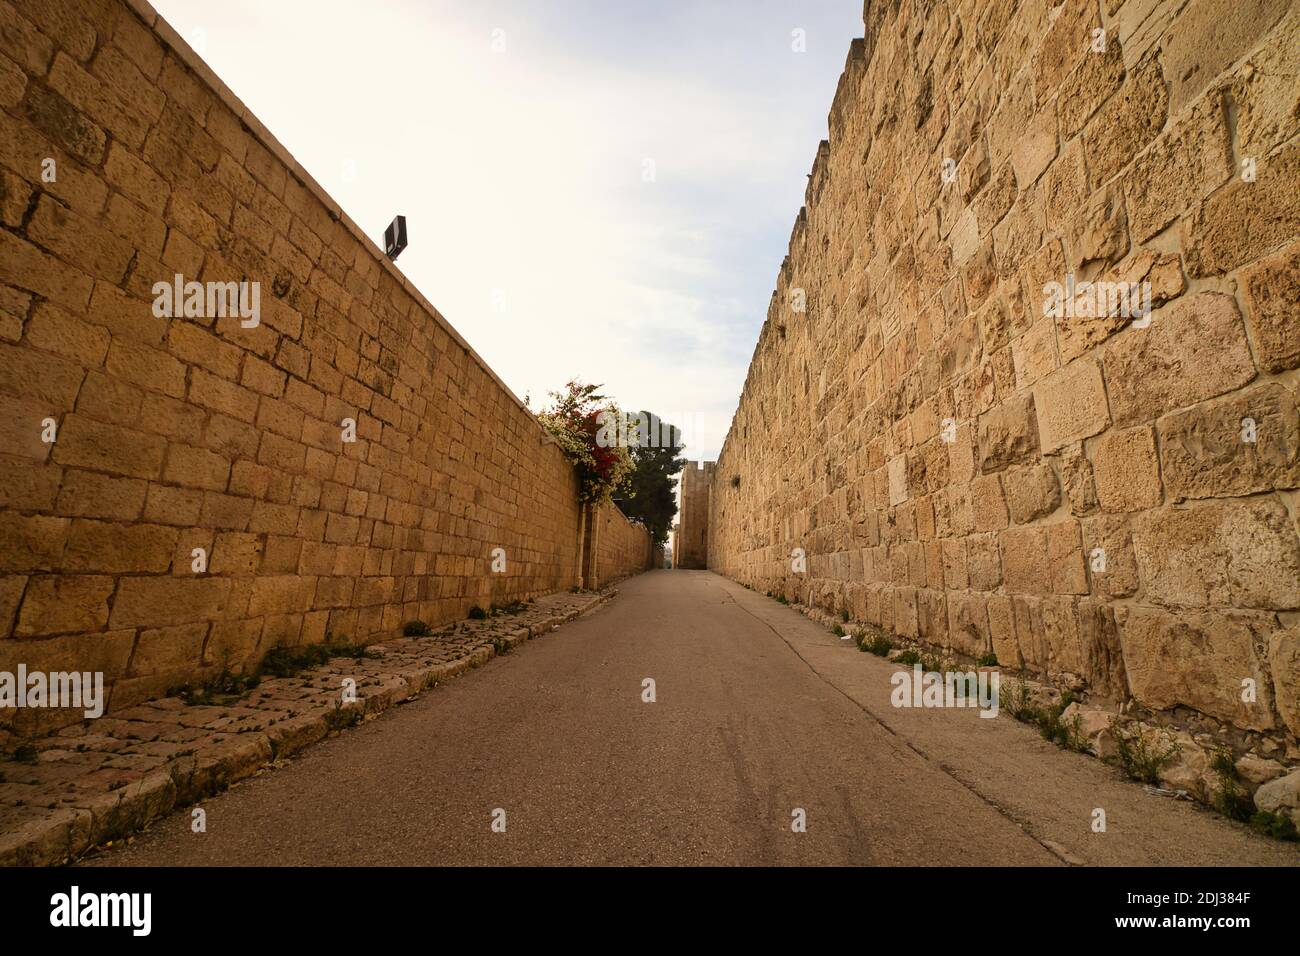 jerusalem, israel. 04-12- 2020. The walls around the Jewish Quarter in the Old City and the road that surrounds it Stock Photo